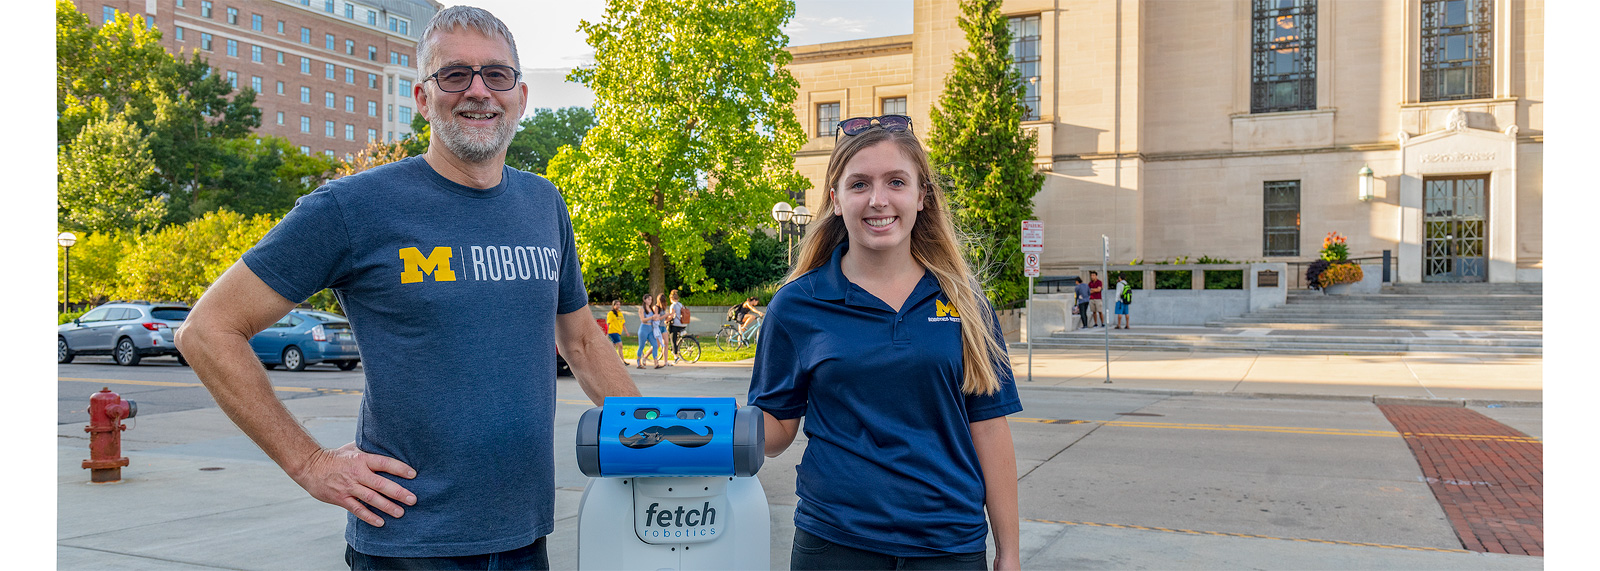 Jessy Grizzle and Liz Olson of U-M robotics with the robot "Fetch"